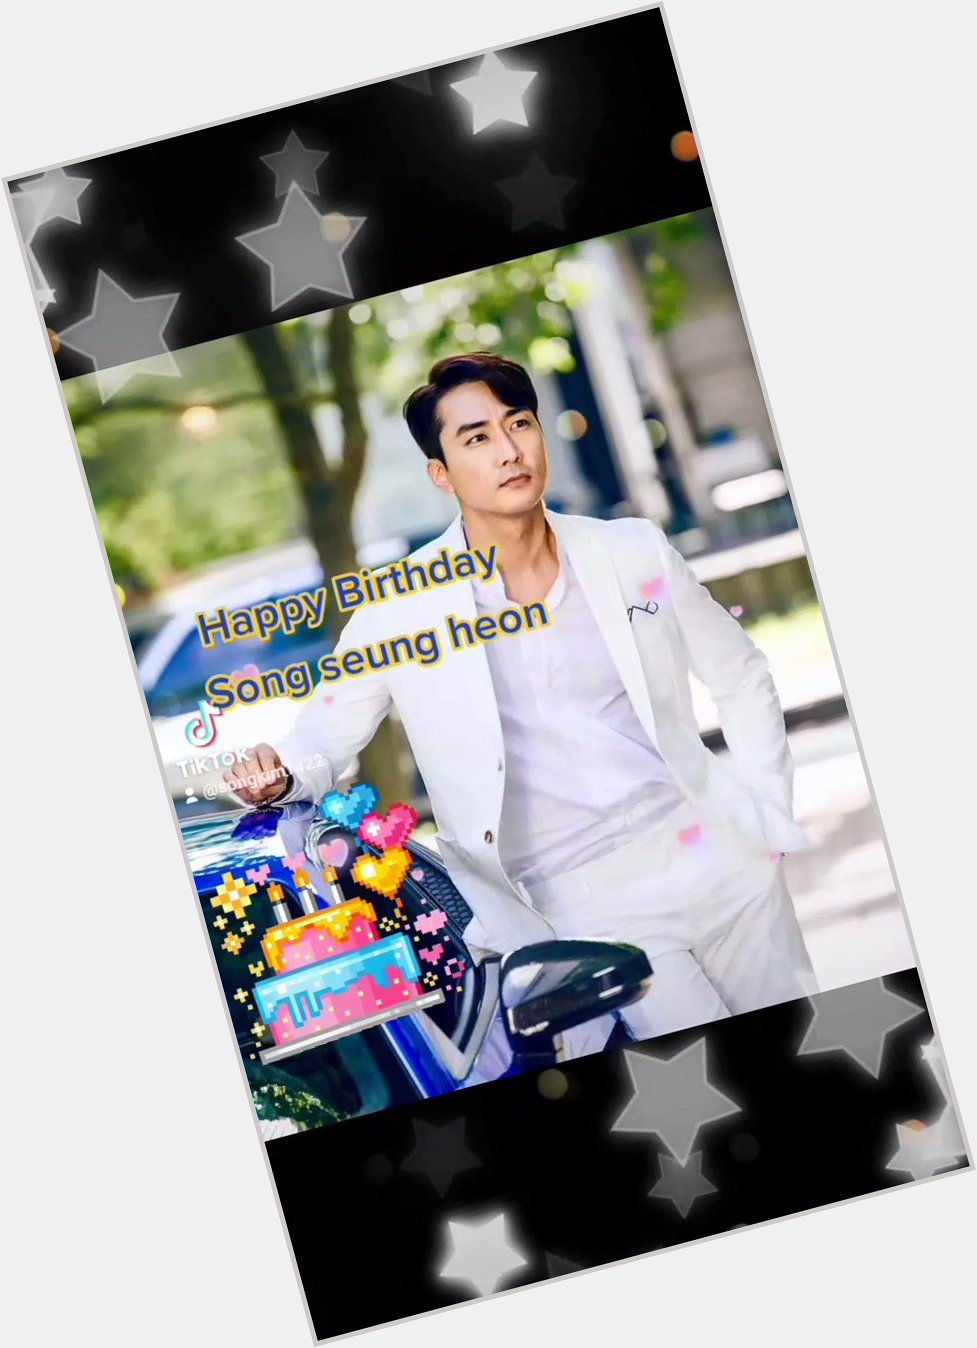  Happy Birthday Song seung Heon   ..thanks to you I fell in love with Korean dramas .. I Love You  